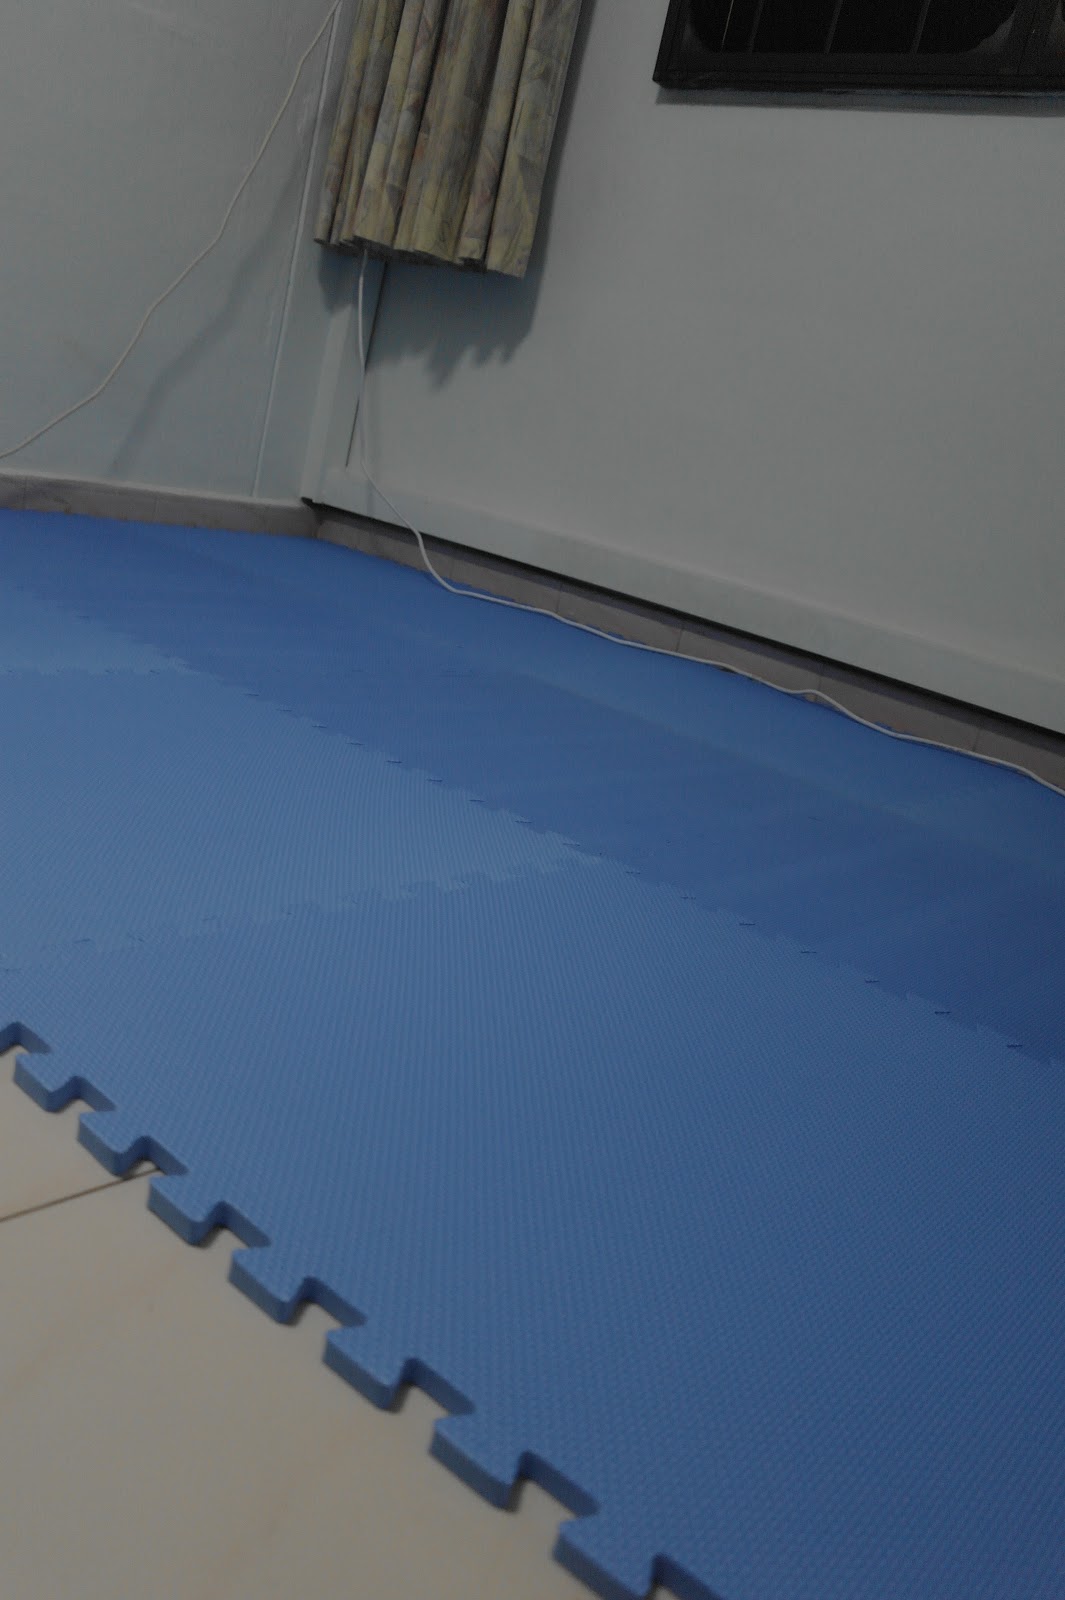 The Matching Blue Floor Mats To The Wall